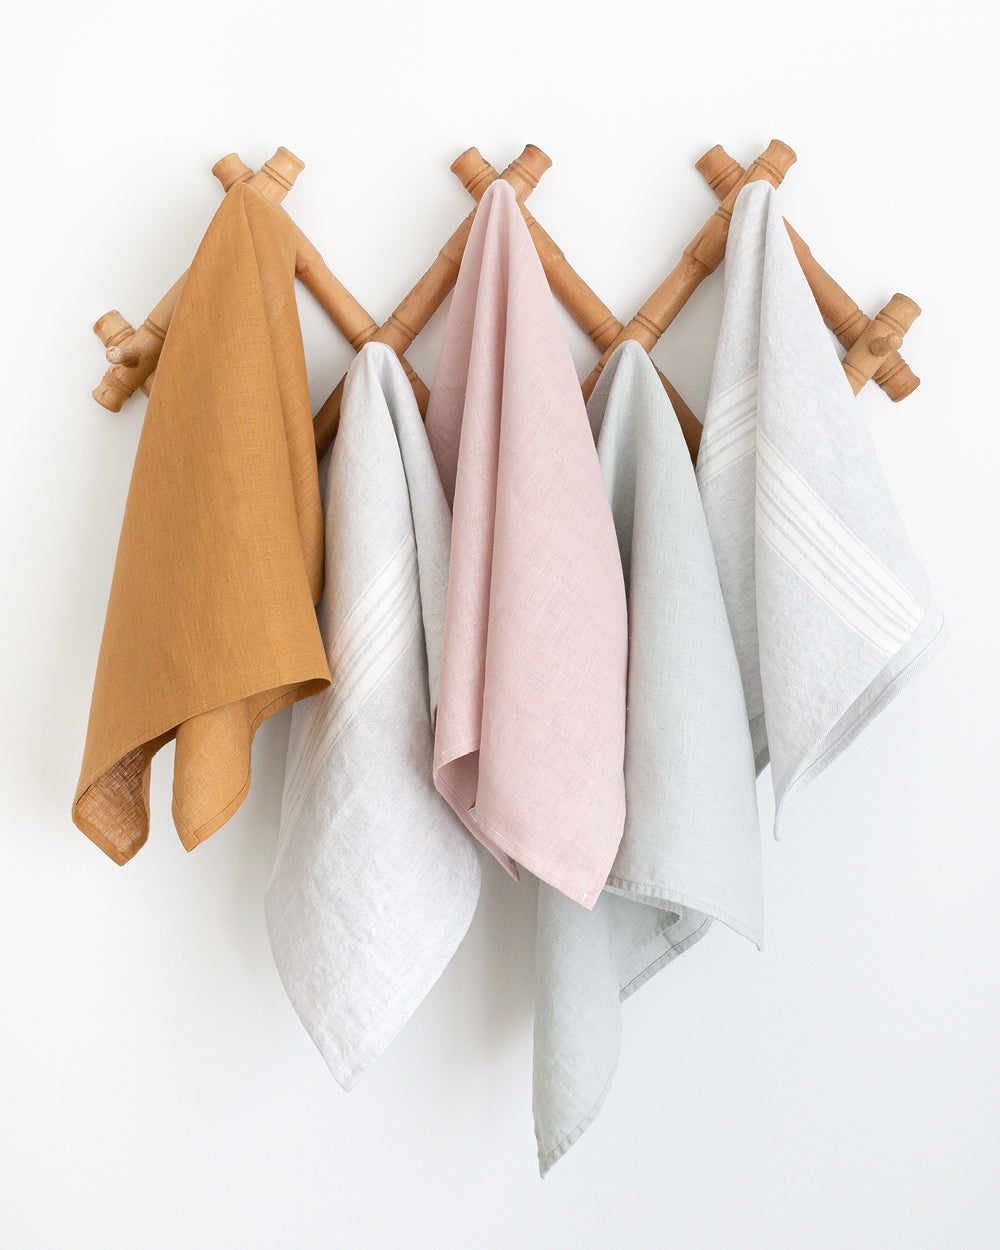 Collection of Linen tea towels from Hemme hanging on hooks